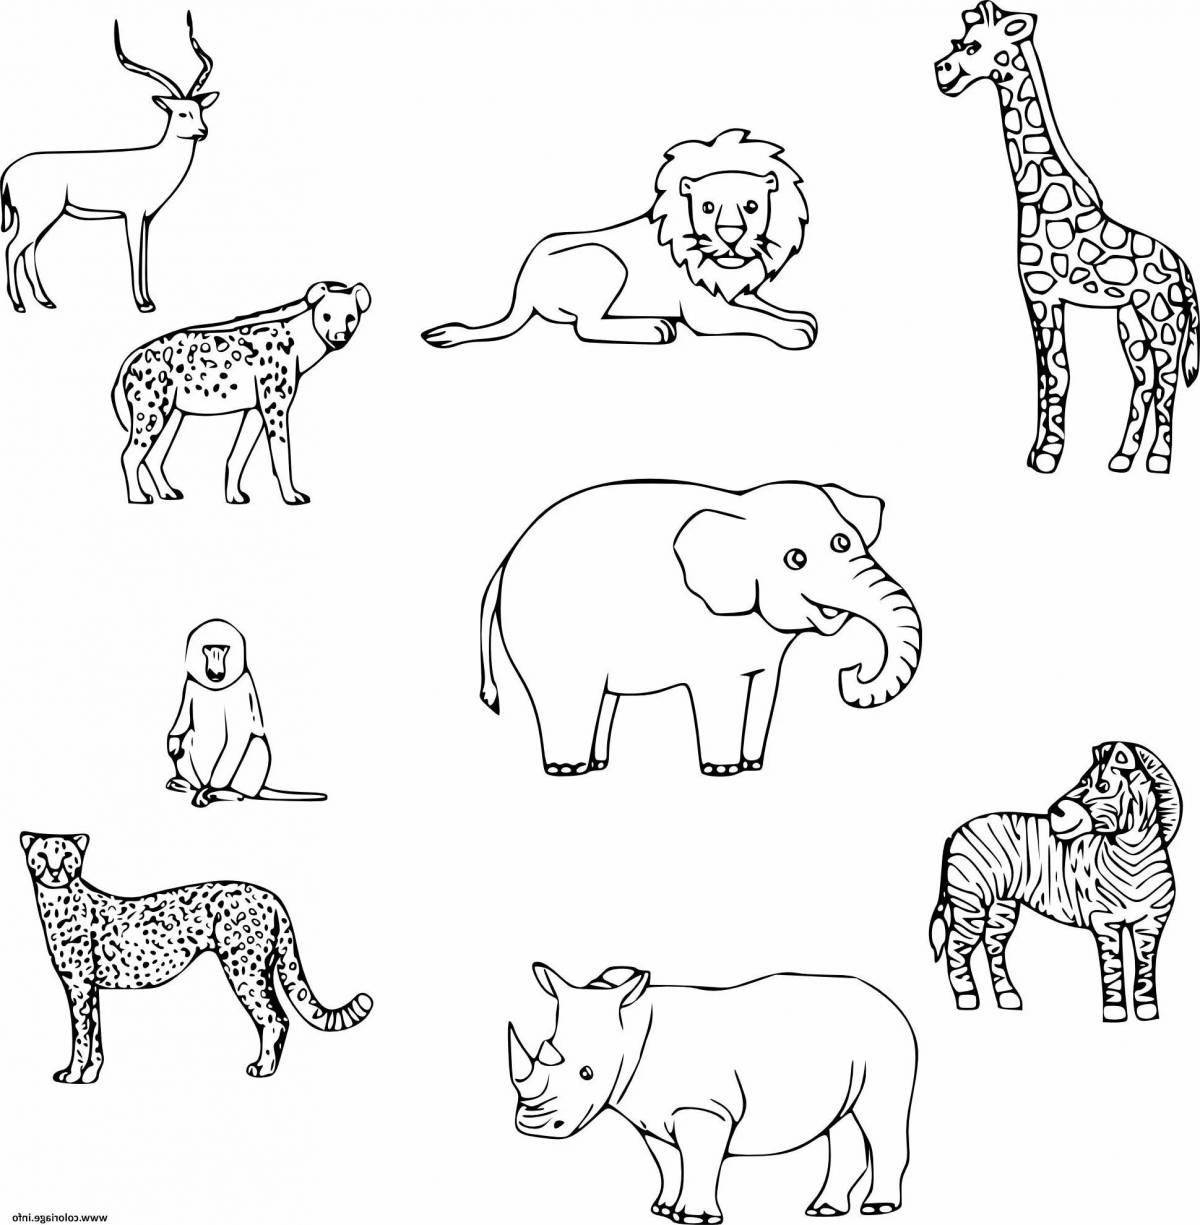 Exciting wild animal coloring page